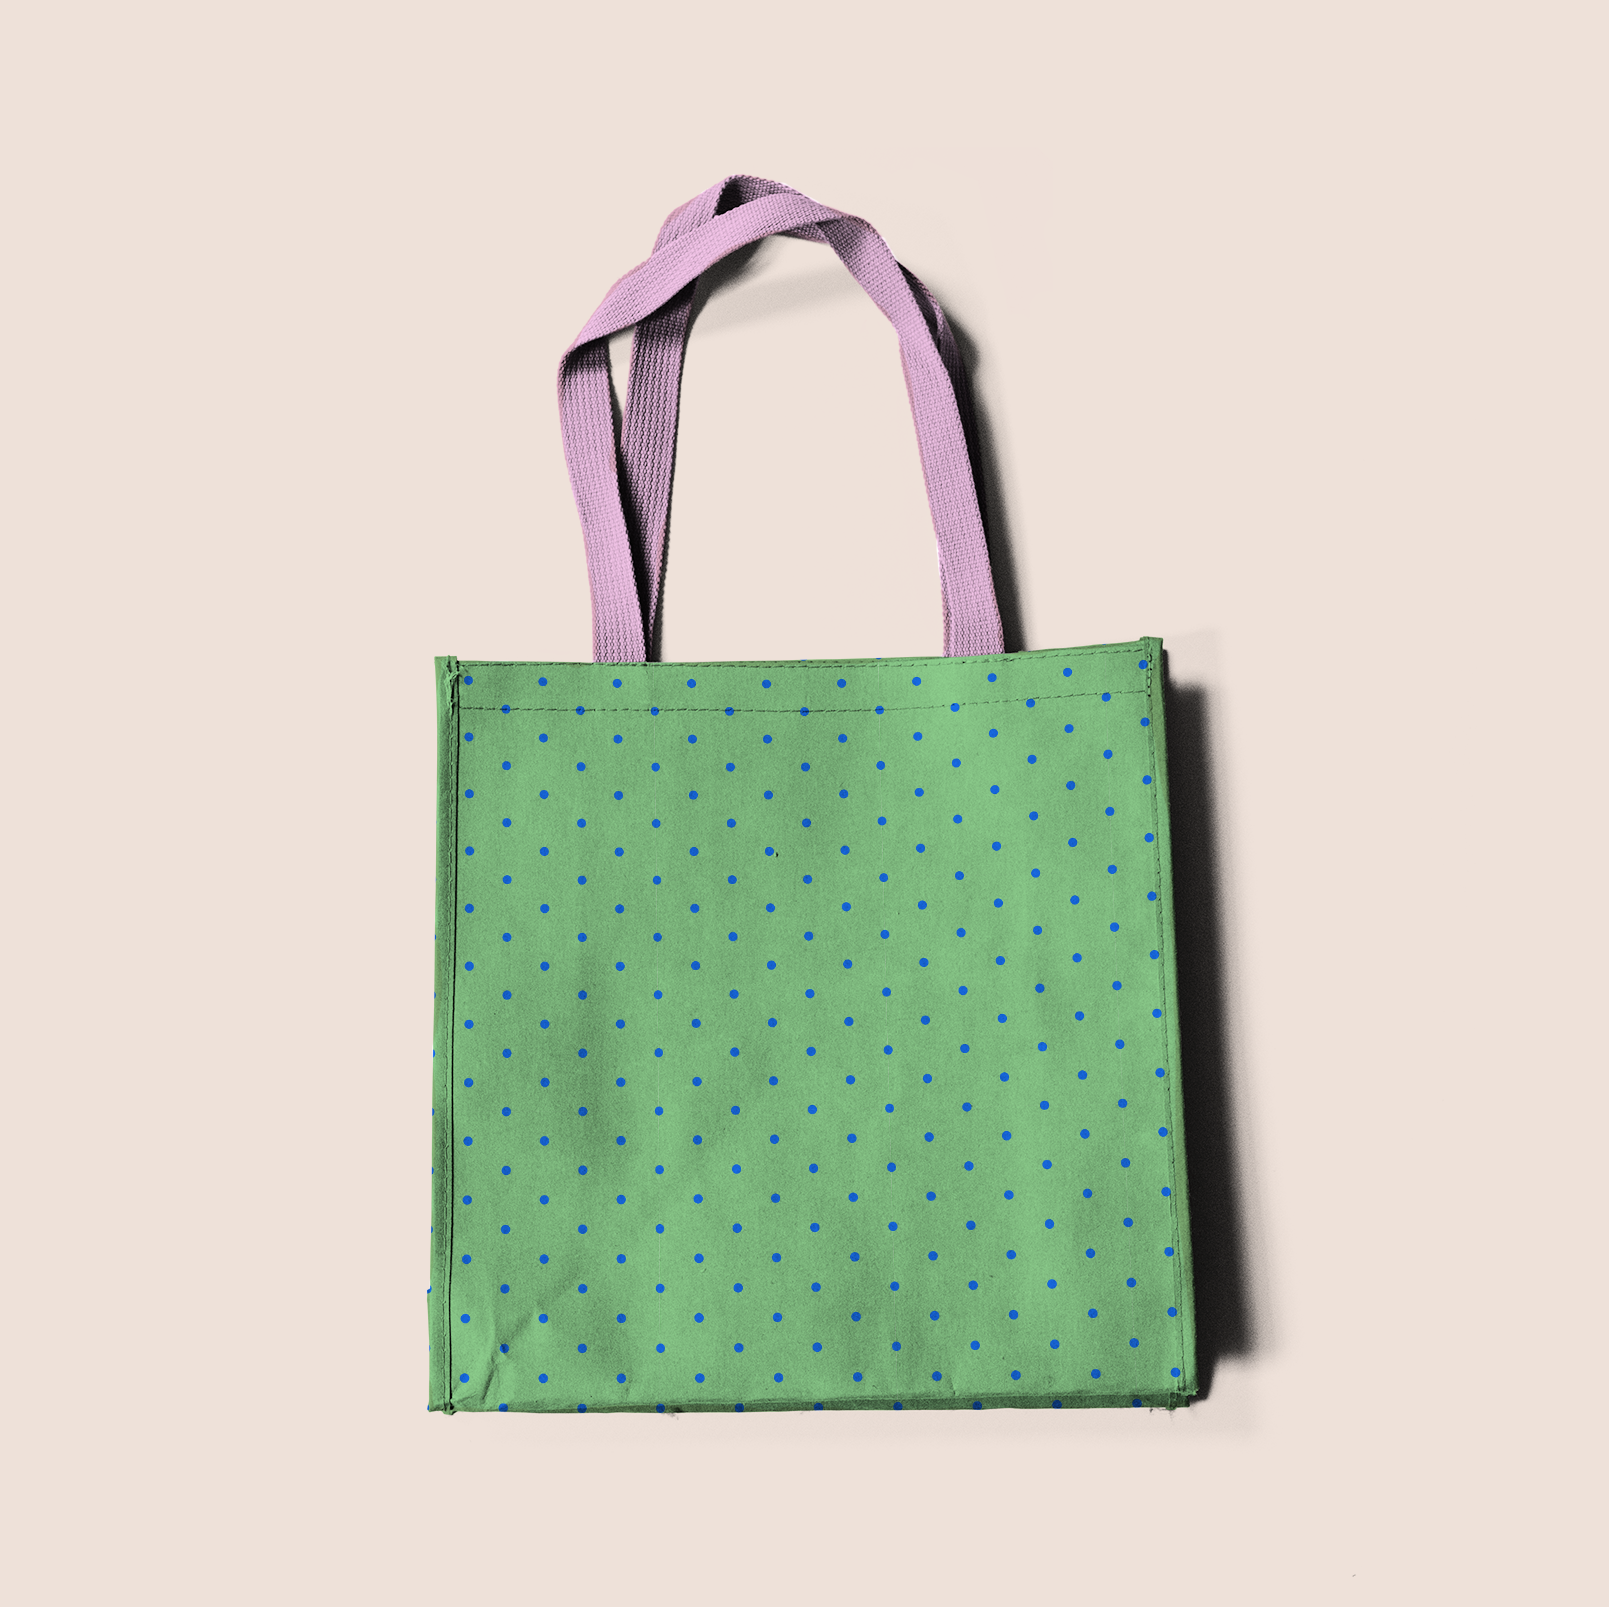 Trivial dots trendy in green pattern design printed on recycled fabric bags